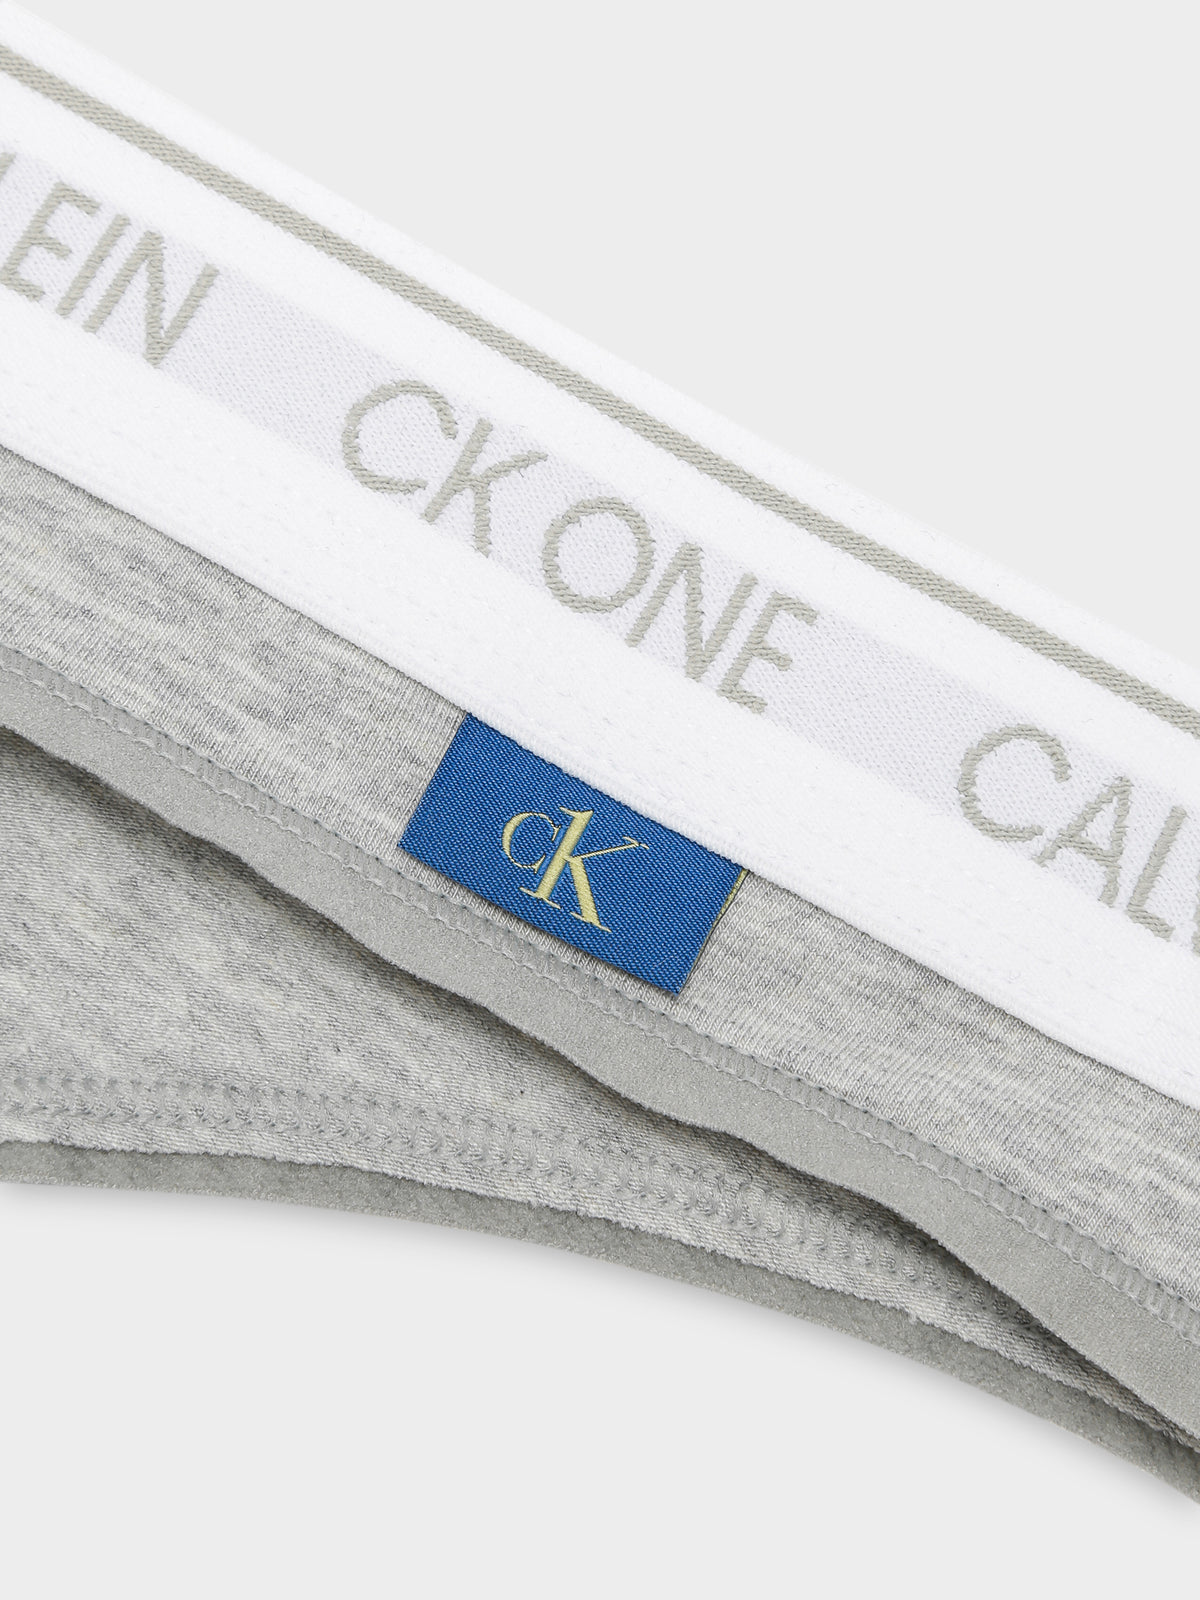 CK One Cotton Thong in Grey Heather